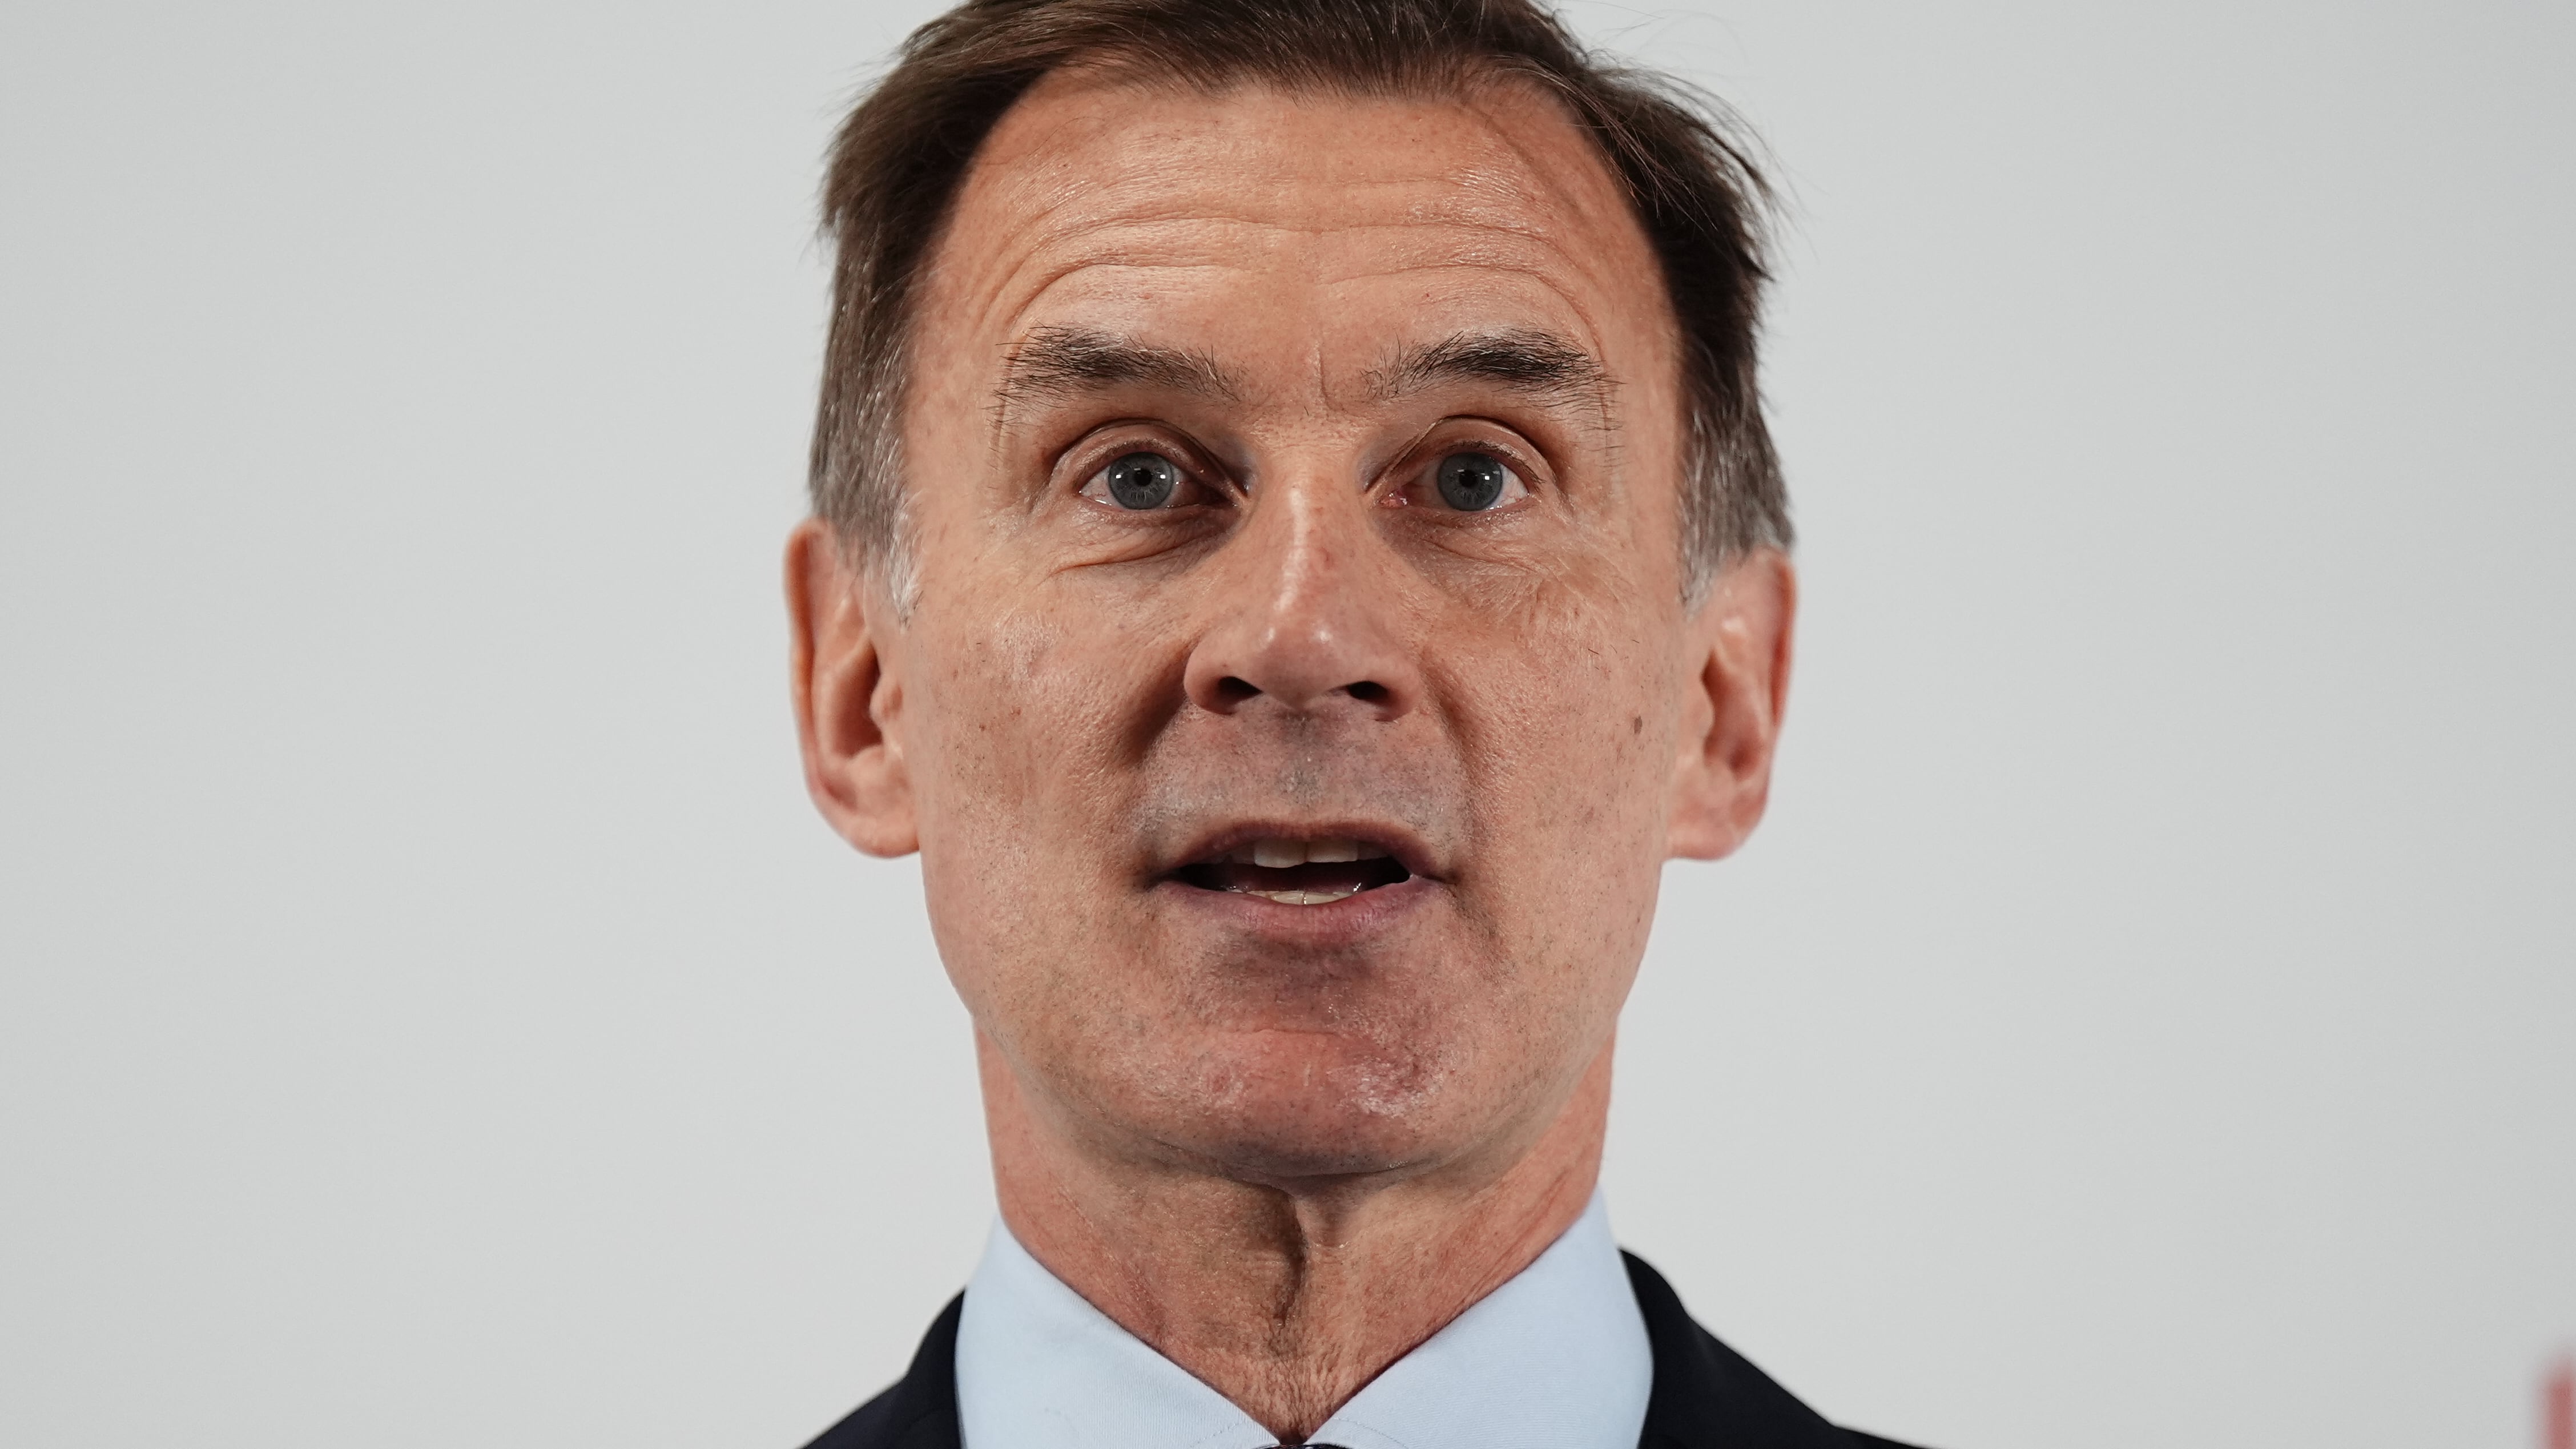 Chancellor Jeremy Hunt could be in danger of losing his seat